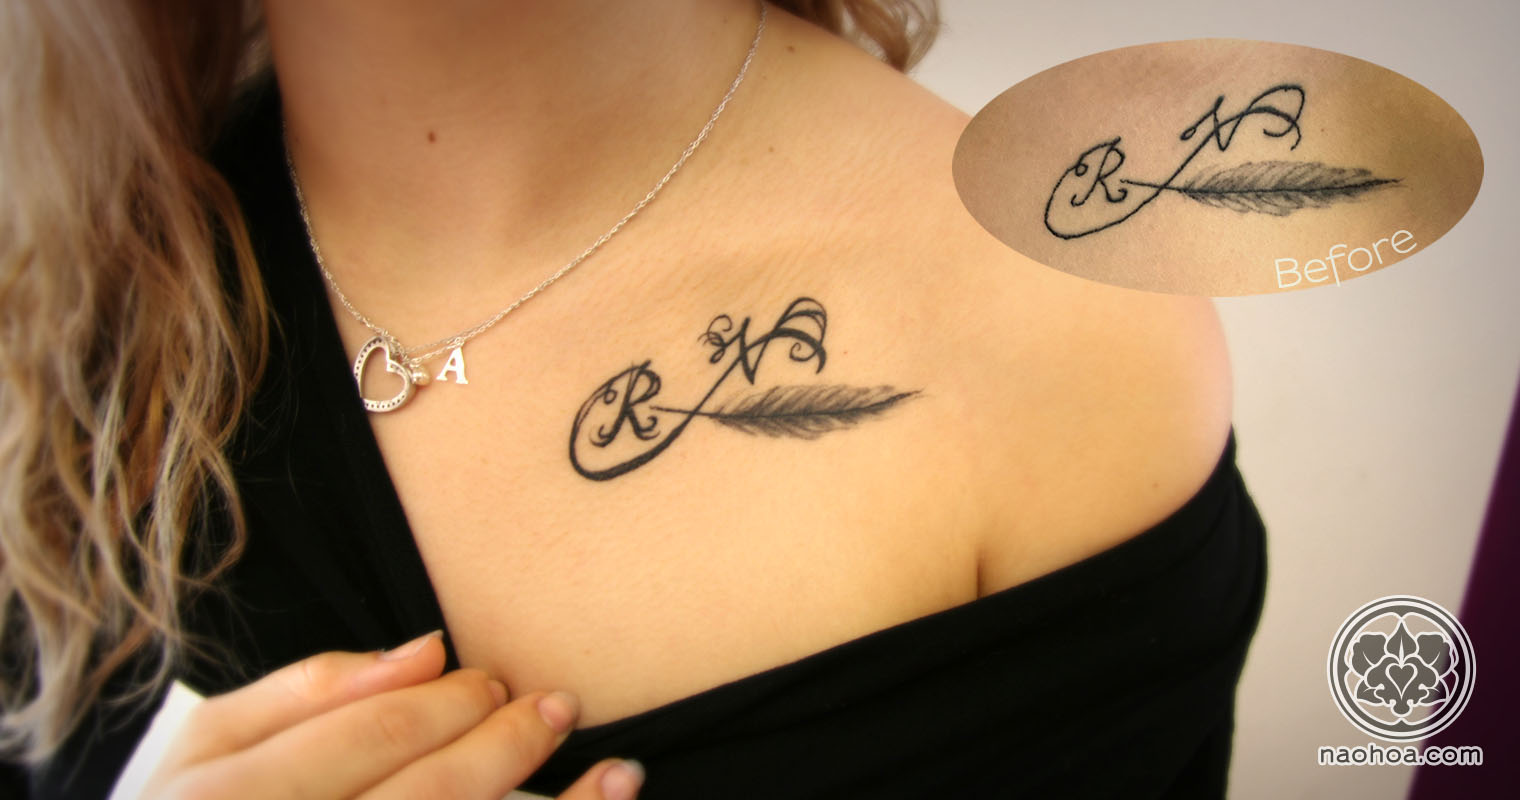 A rework of an existing tattoo to make the initials appear more obvious.